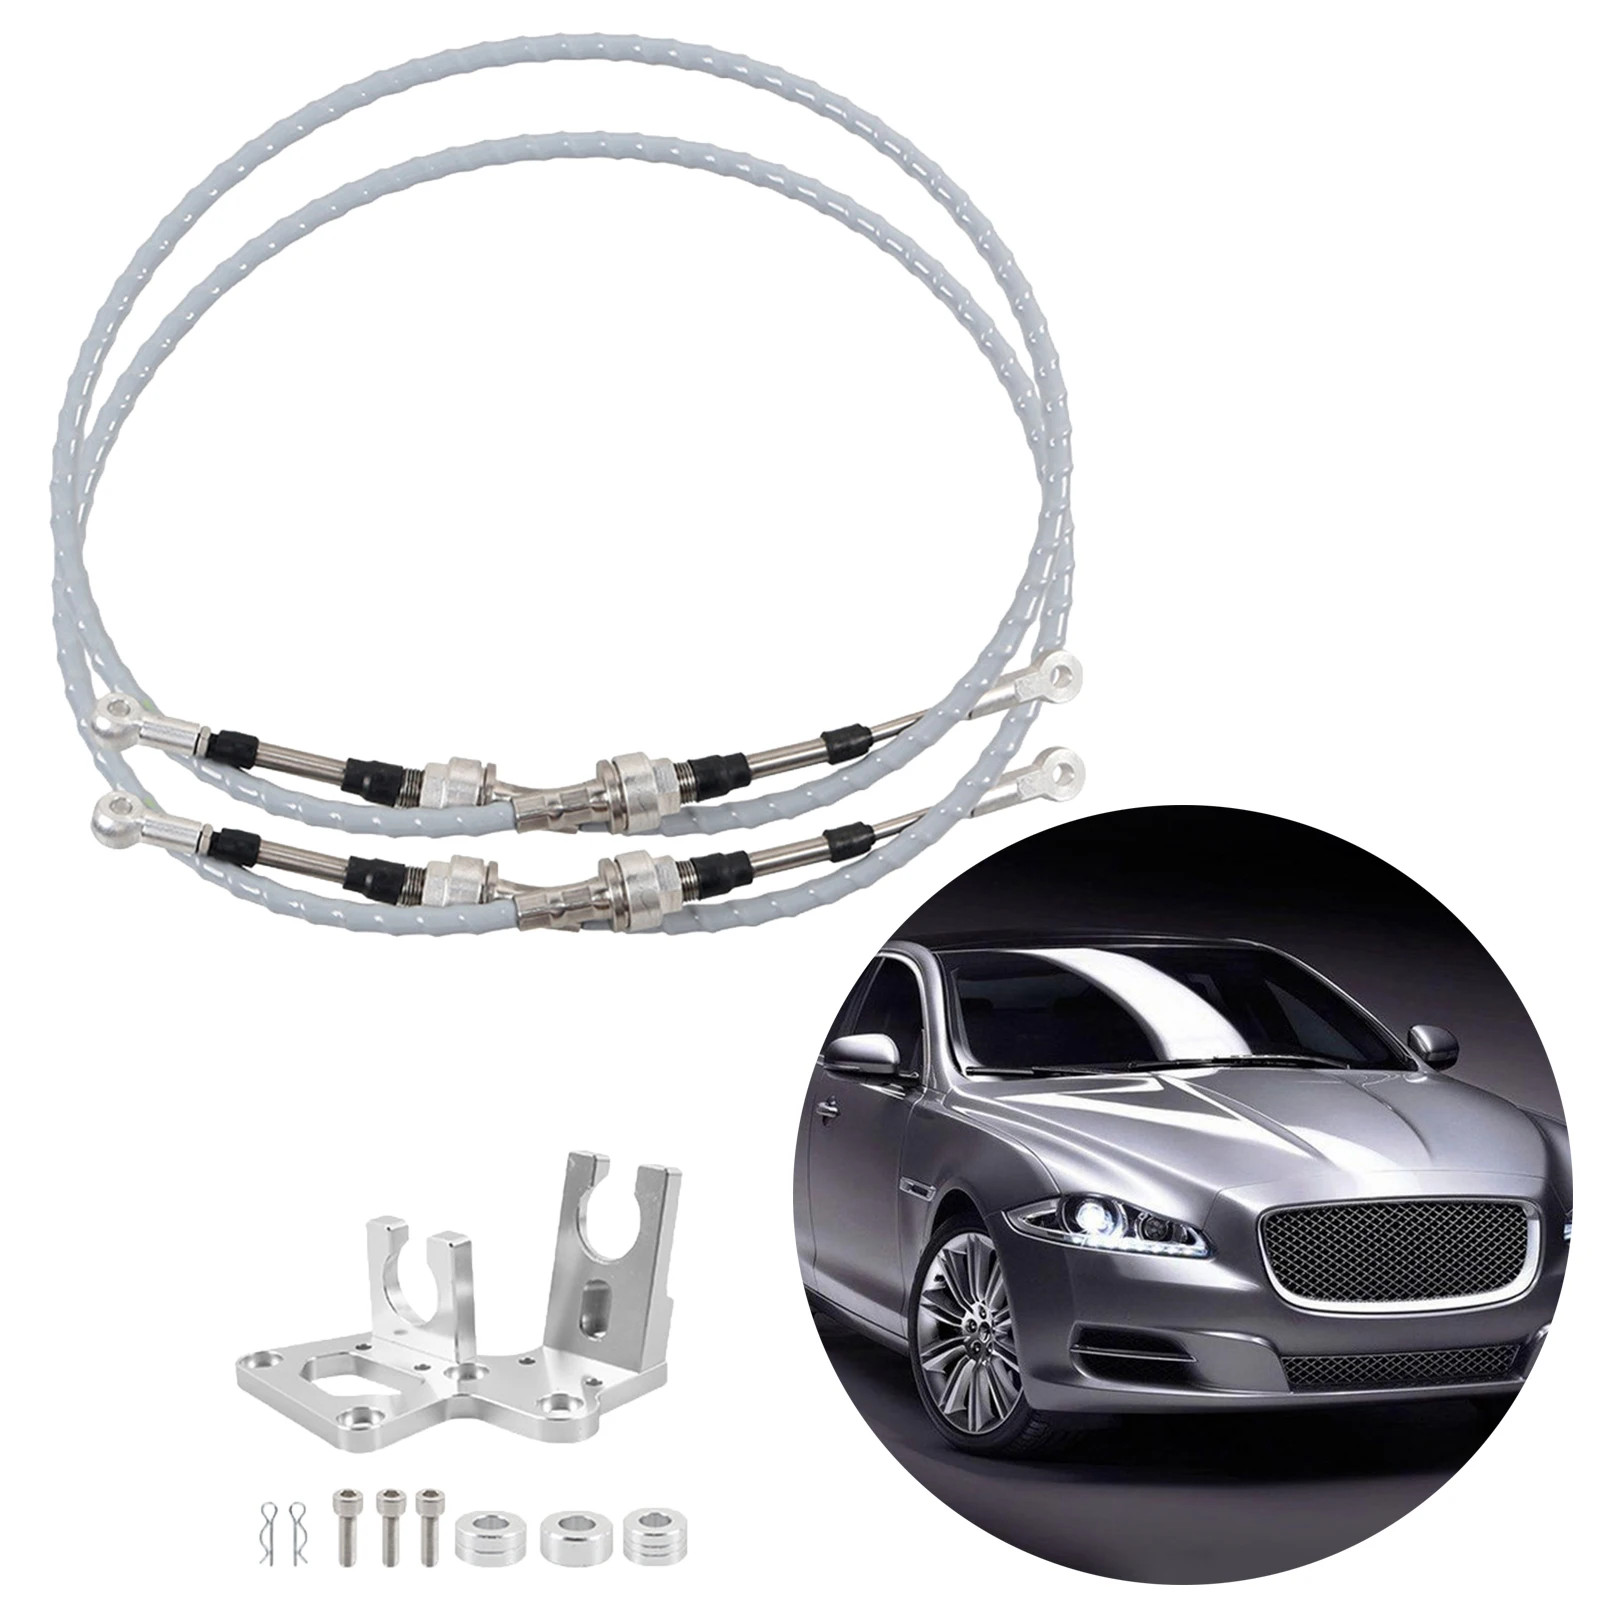 Shifter Cables & Trans Bracket for Honda Civic K Swap Series EF EG EK 89-00 Perfect Fitment, directly replacement